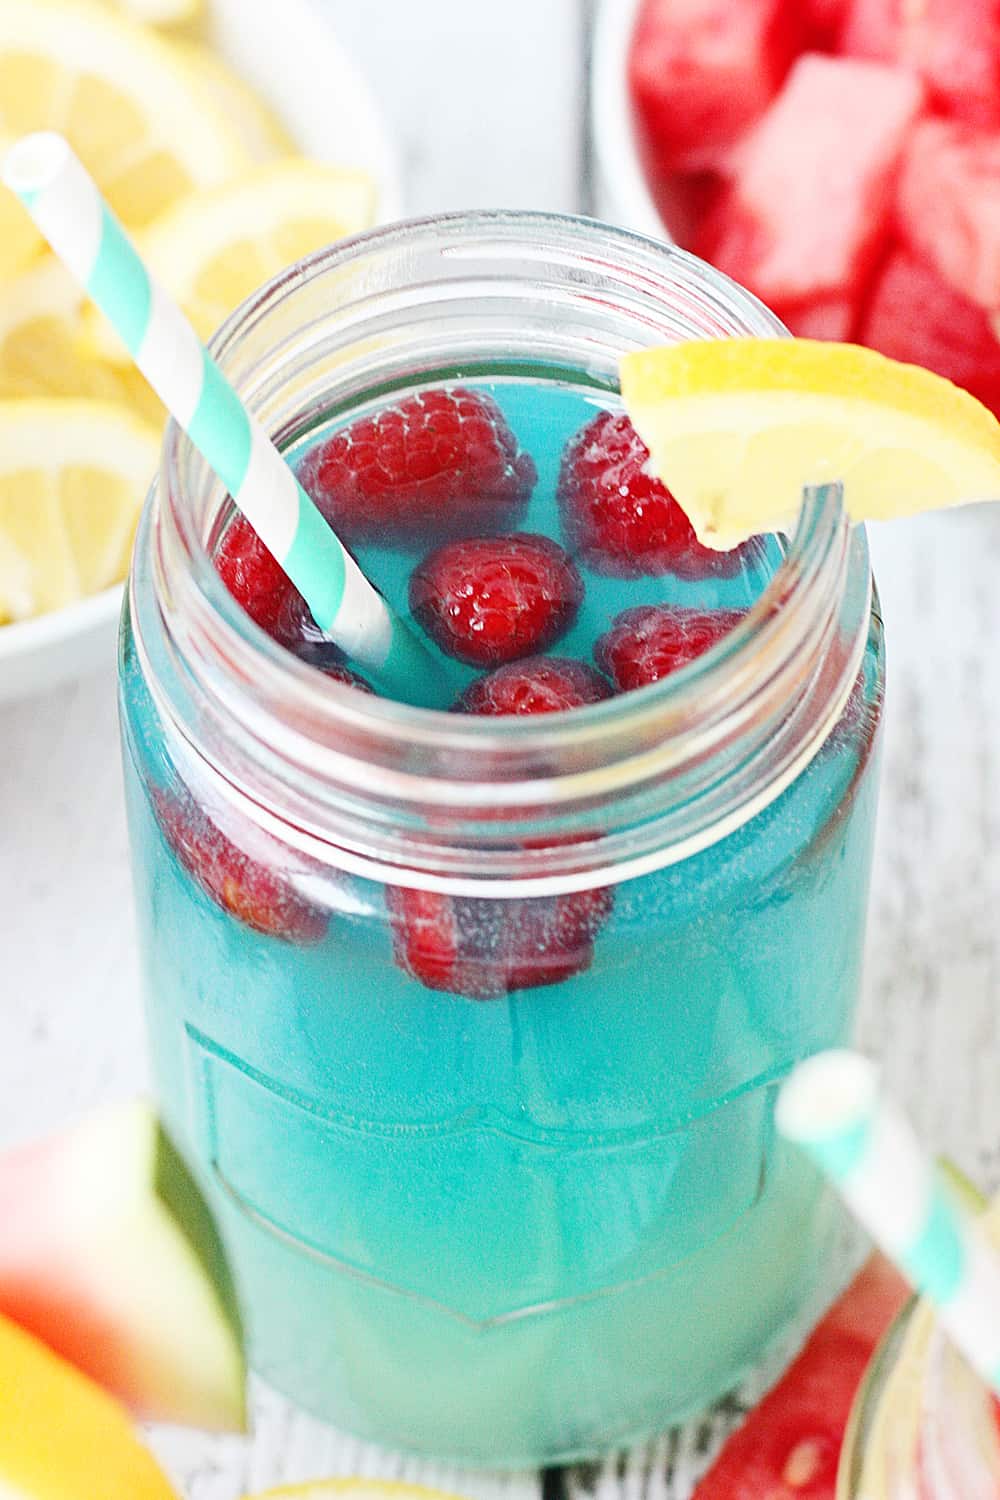 Lightened-up Lemonade Bar -- A lemonade bar is perfect for weekend brunch! This lightened-up version combines diet lemonade, sugar-free Torani syrups, and fresh fruit for a variety of fabulous flavor combinations. | halfscratched.com #AToraniBrunch #ad